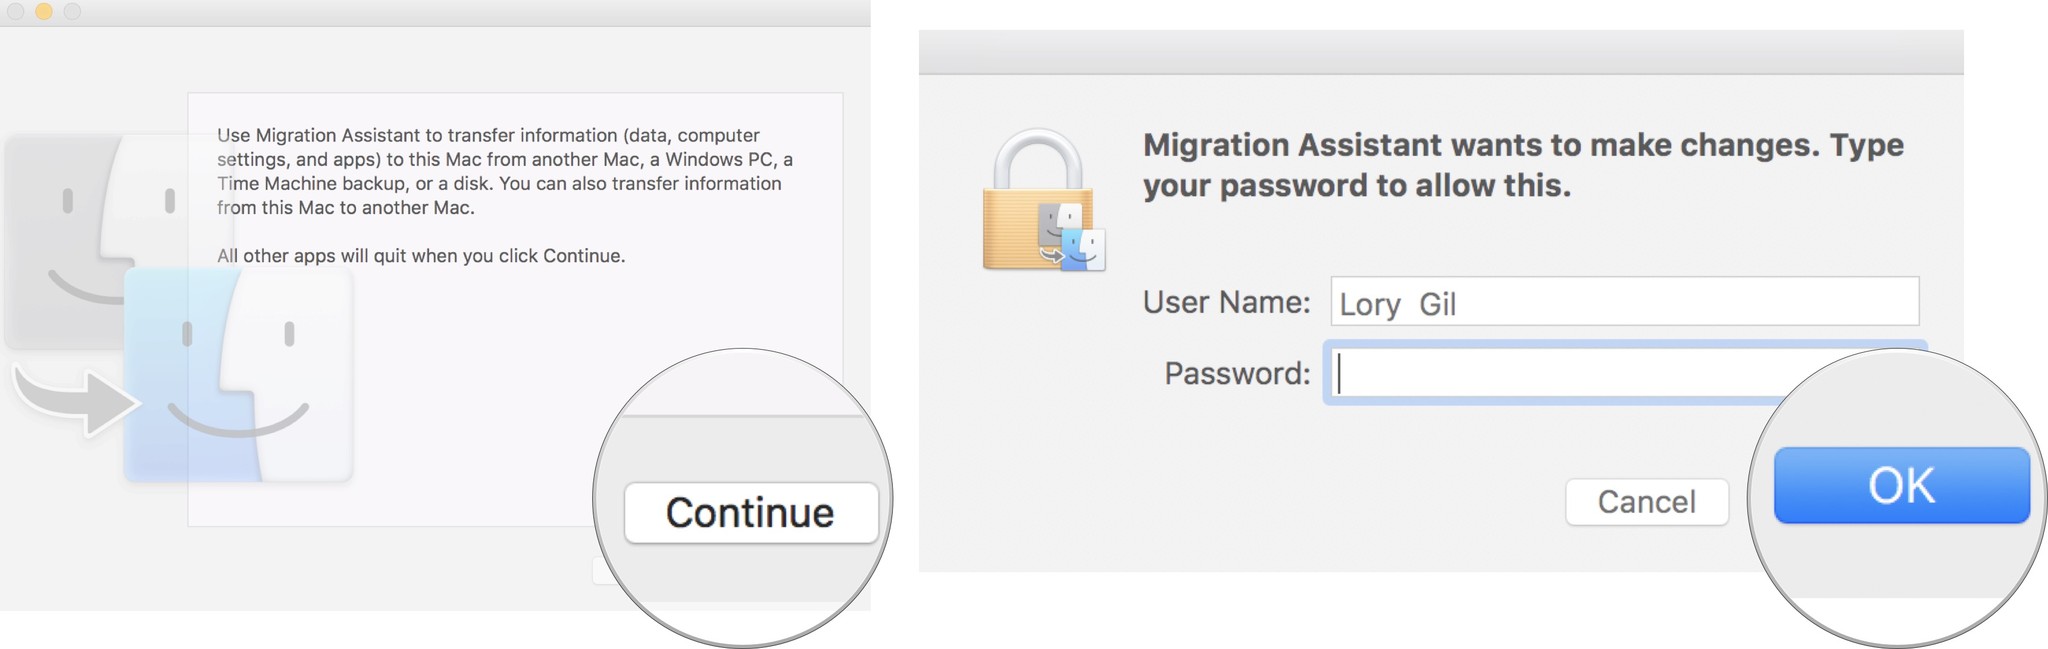 Migrate data from your old Mac to your new Mac showing how to click Continue, enter your administrator password, then click OK